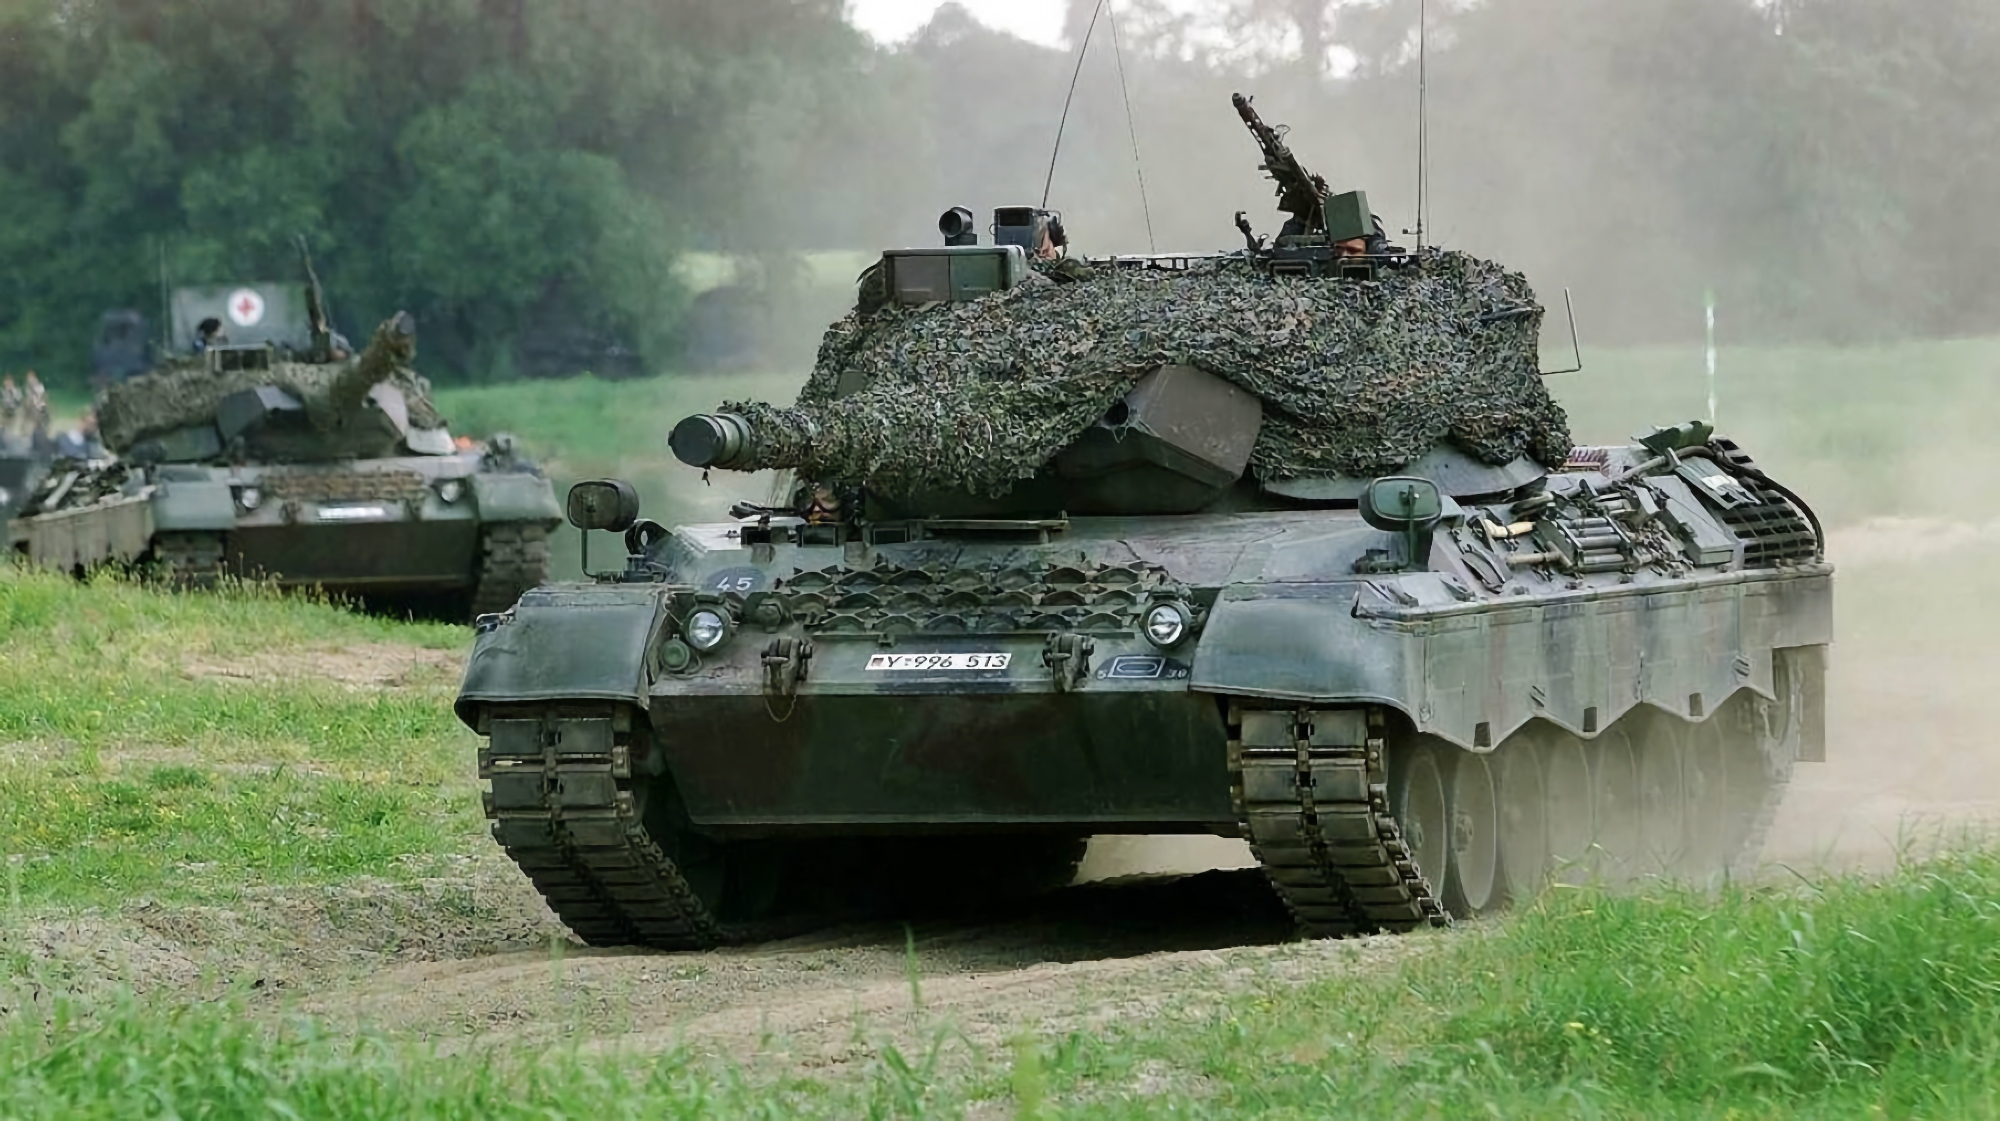 Germany has handed over a new batch of Leopard 1A5 tanks, ammunition for Gepard and other weapons to Ukraine